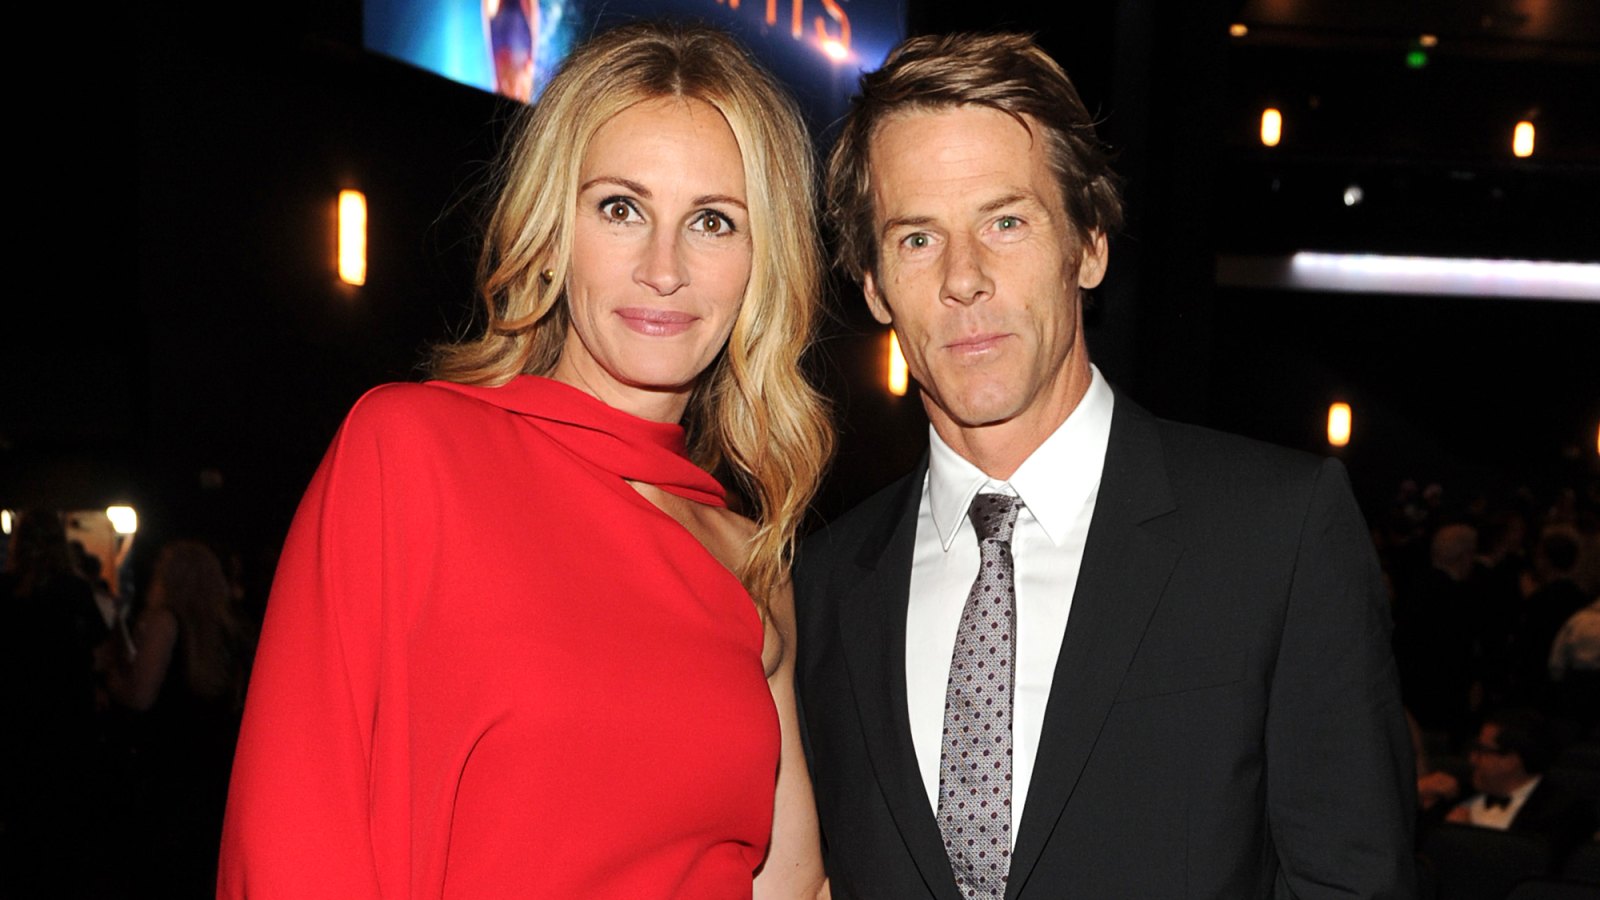 Julia Roberts Says Marriage to Husband Danny Moder, Life With 3 Kids Is a ‘Dream Come True’